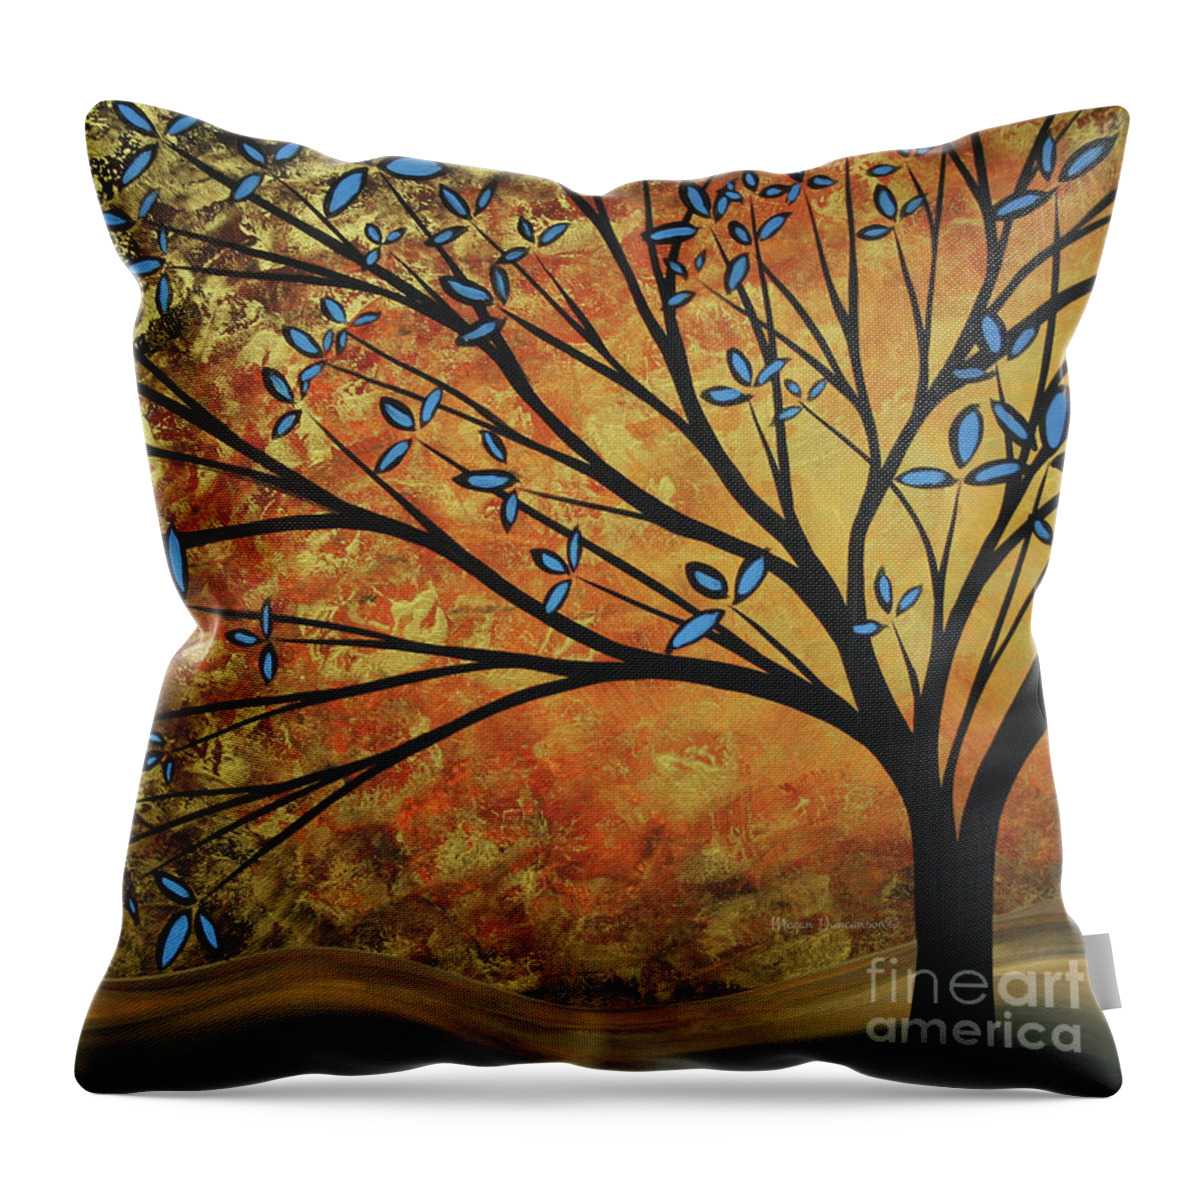 Abstract Throw Pillow featuring the painting Abstract Golden Landscape Art Original Painting Peaceful Awakening II Diptych Set by Megan Duncanson by Megan Aroon